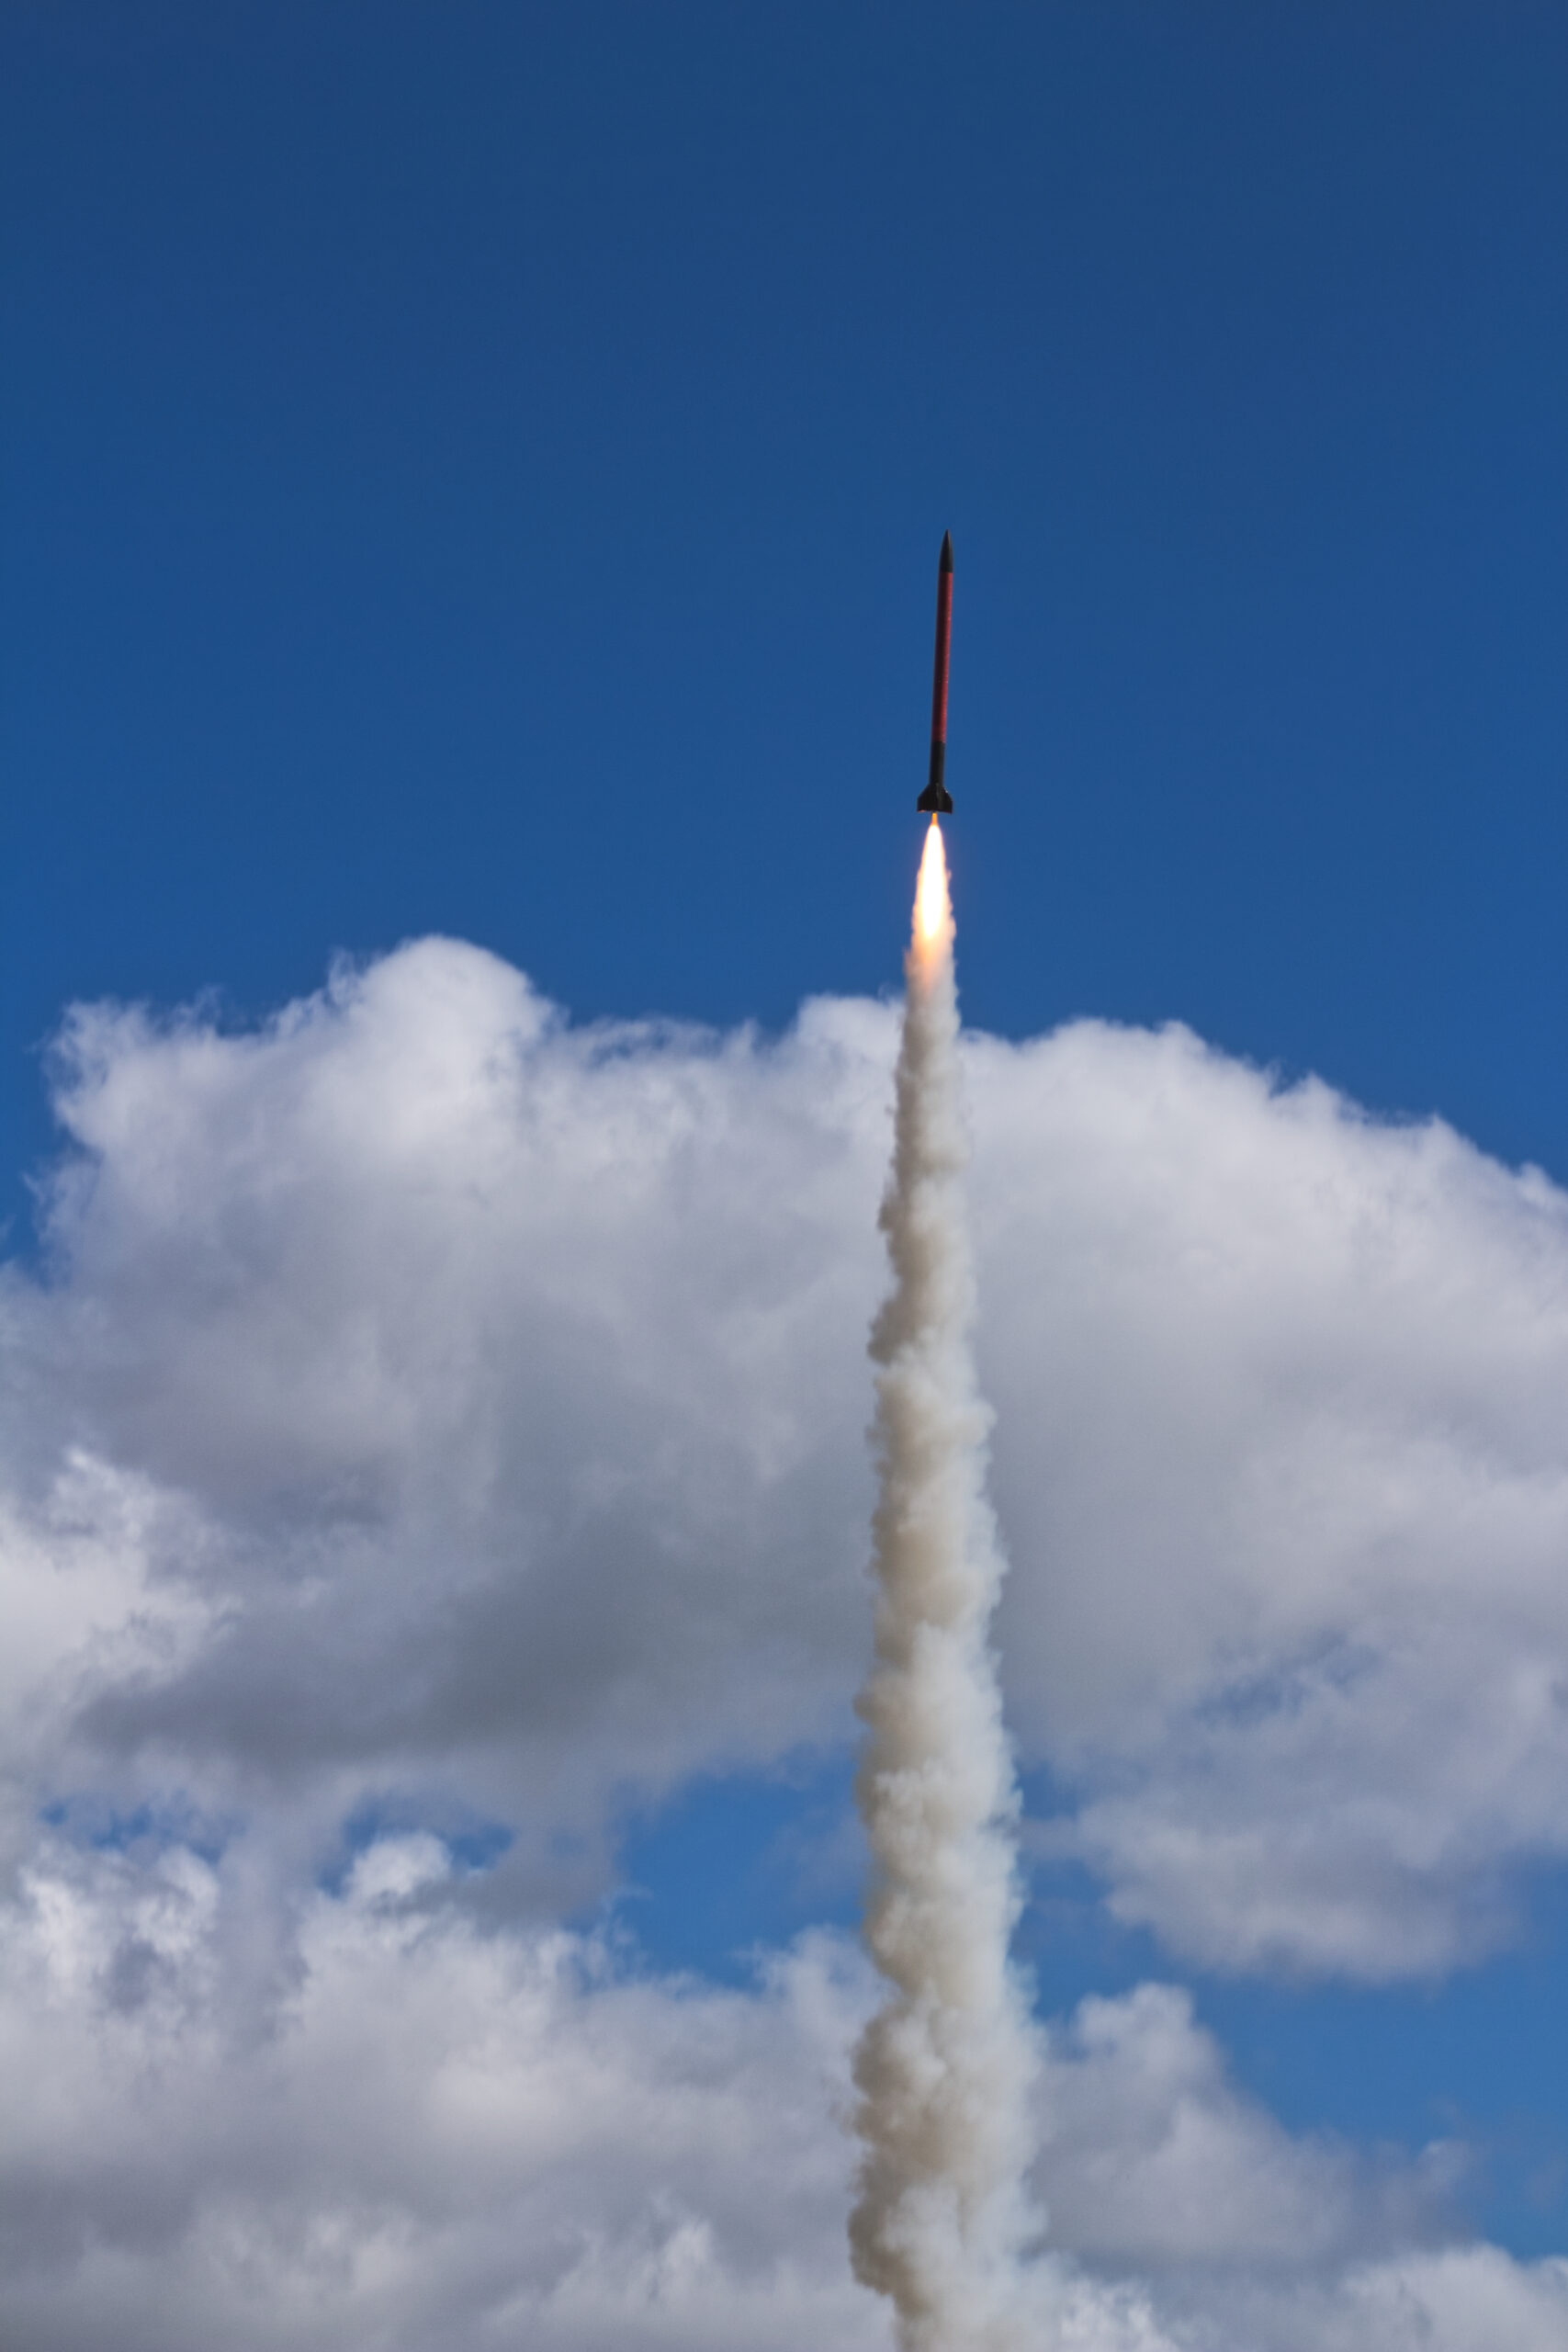 3 more launches at Midland Rocketry Club